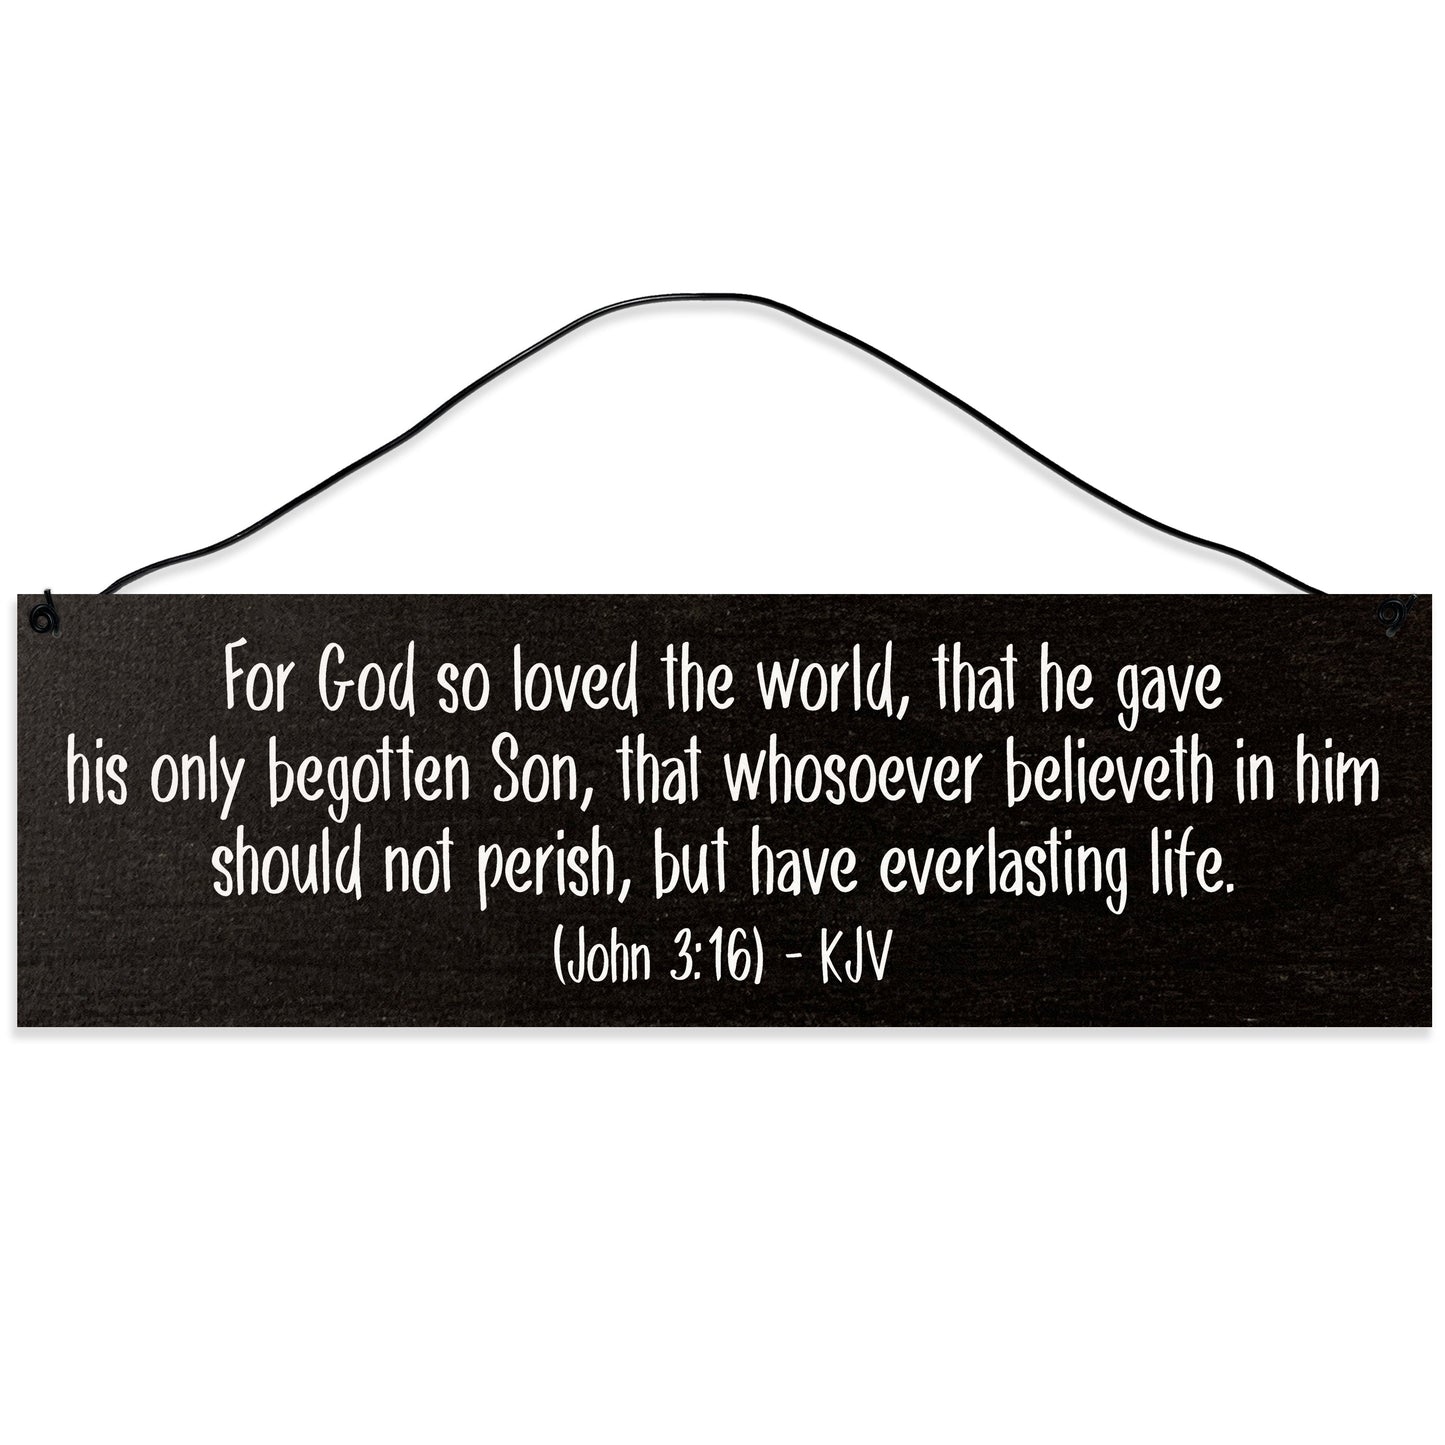 Sawyer's Mill - For God so Loved the World. John 3:16. Wood Sign for Home or Office. Measures 3x10 inches.